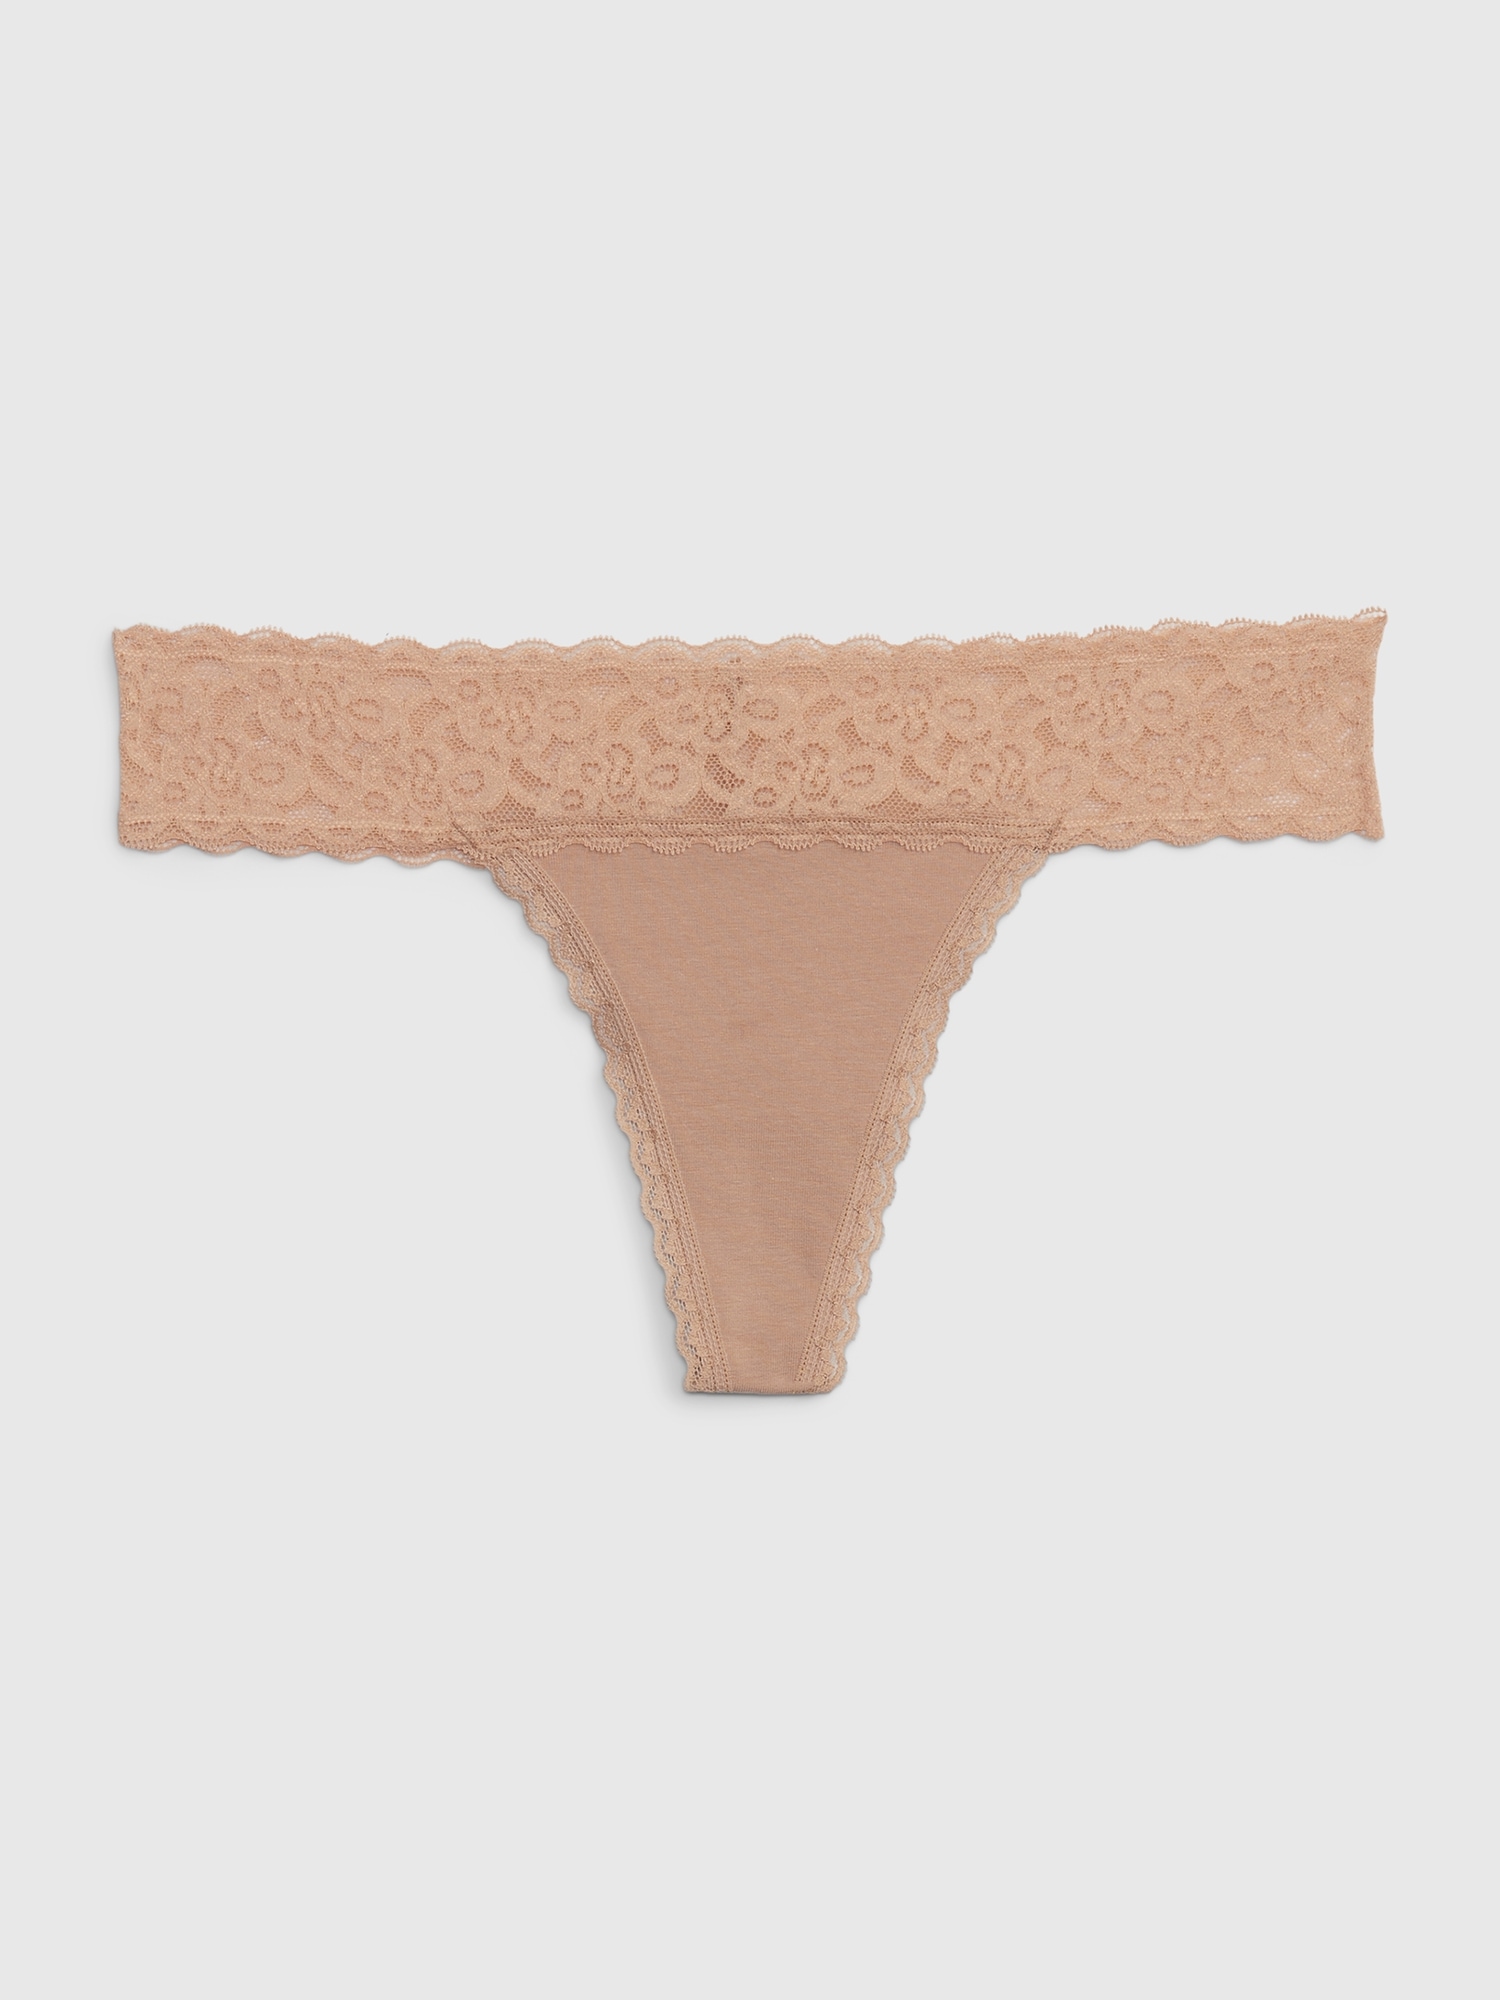 YYDGH Womens Sexy G String Thongs Lace Cotton Pads Panties